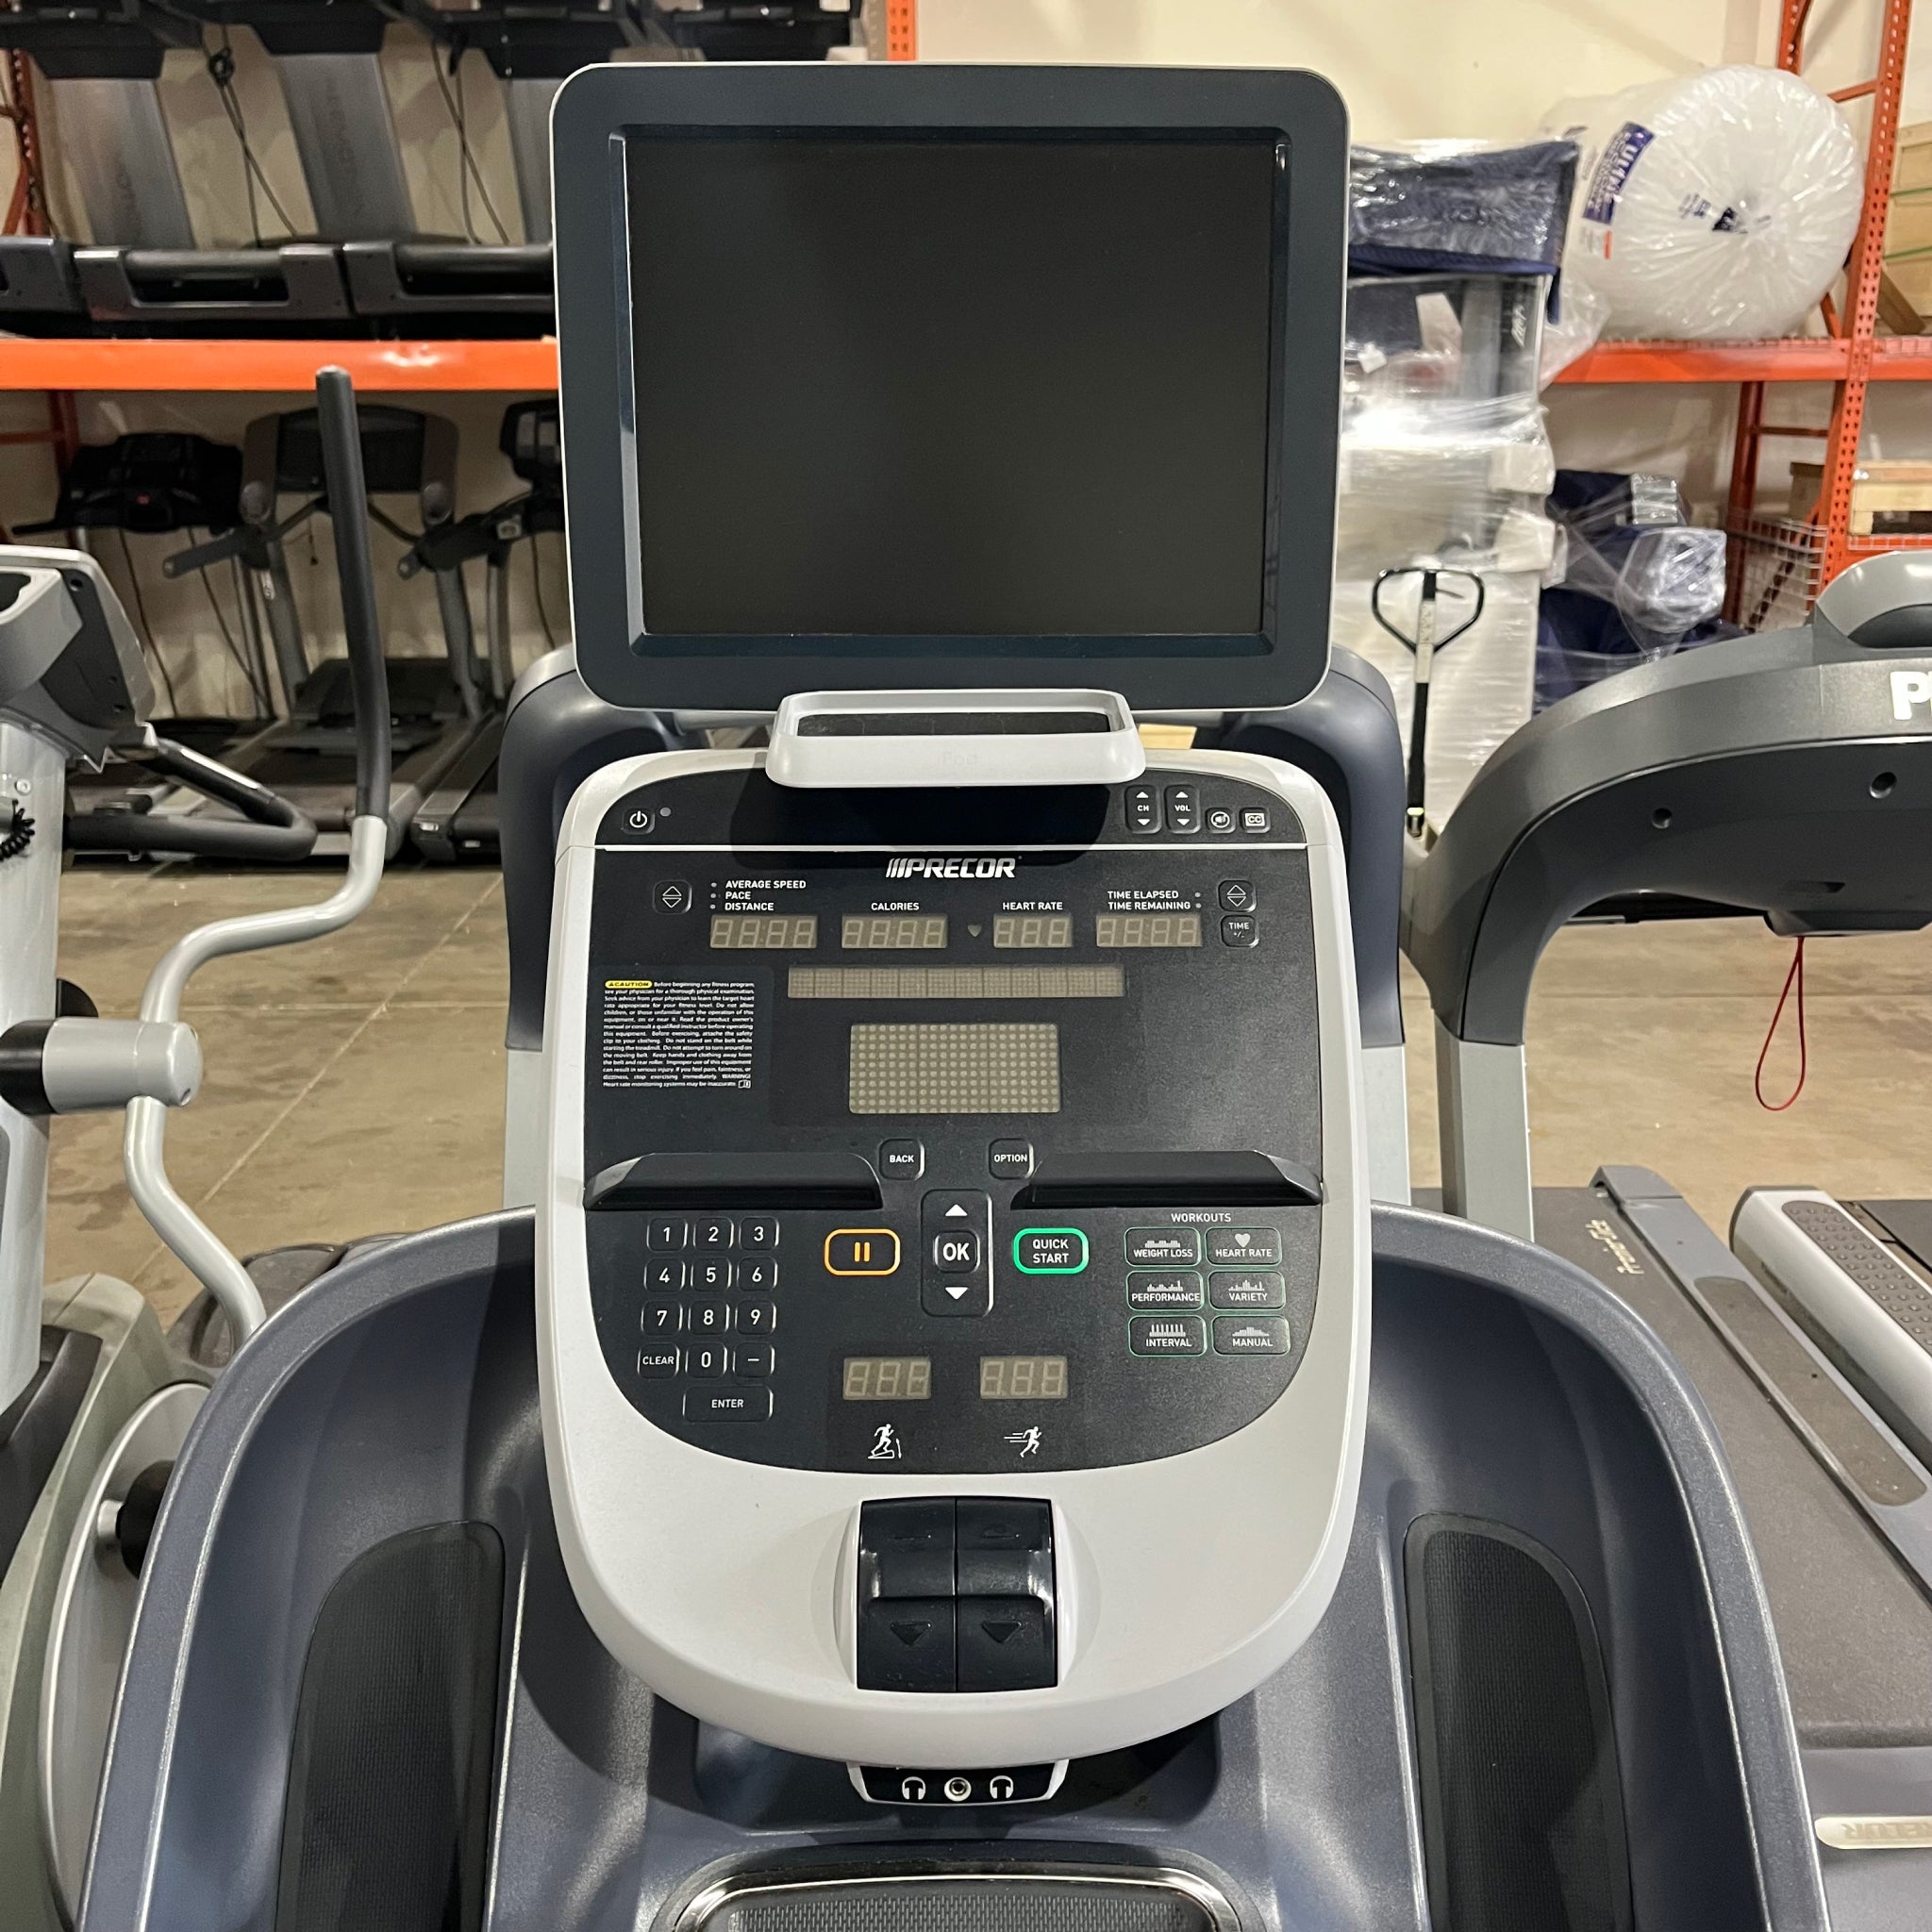 Console with the attached TV Screen on the Precor TRM 835 V2 Treadmill with TV Screen in Warehouse